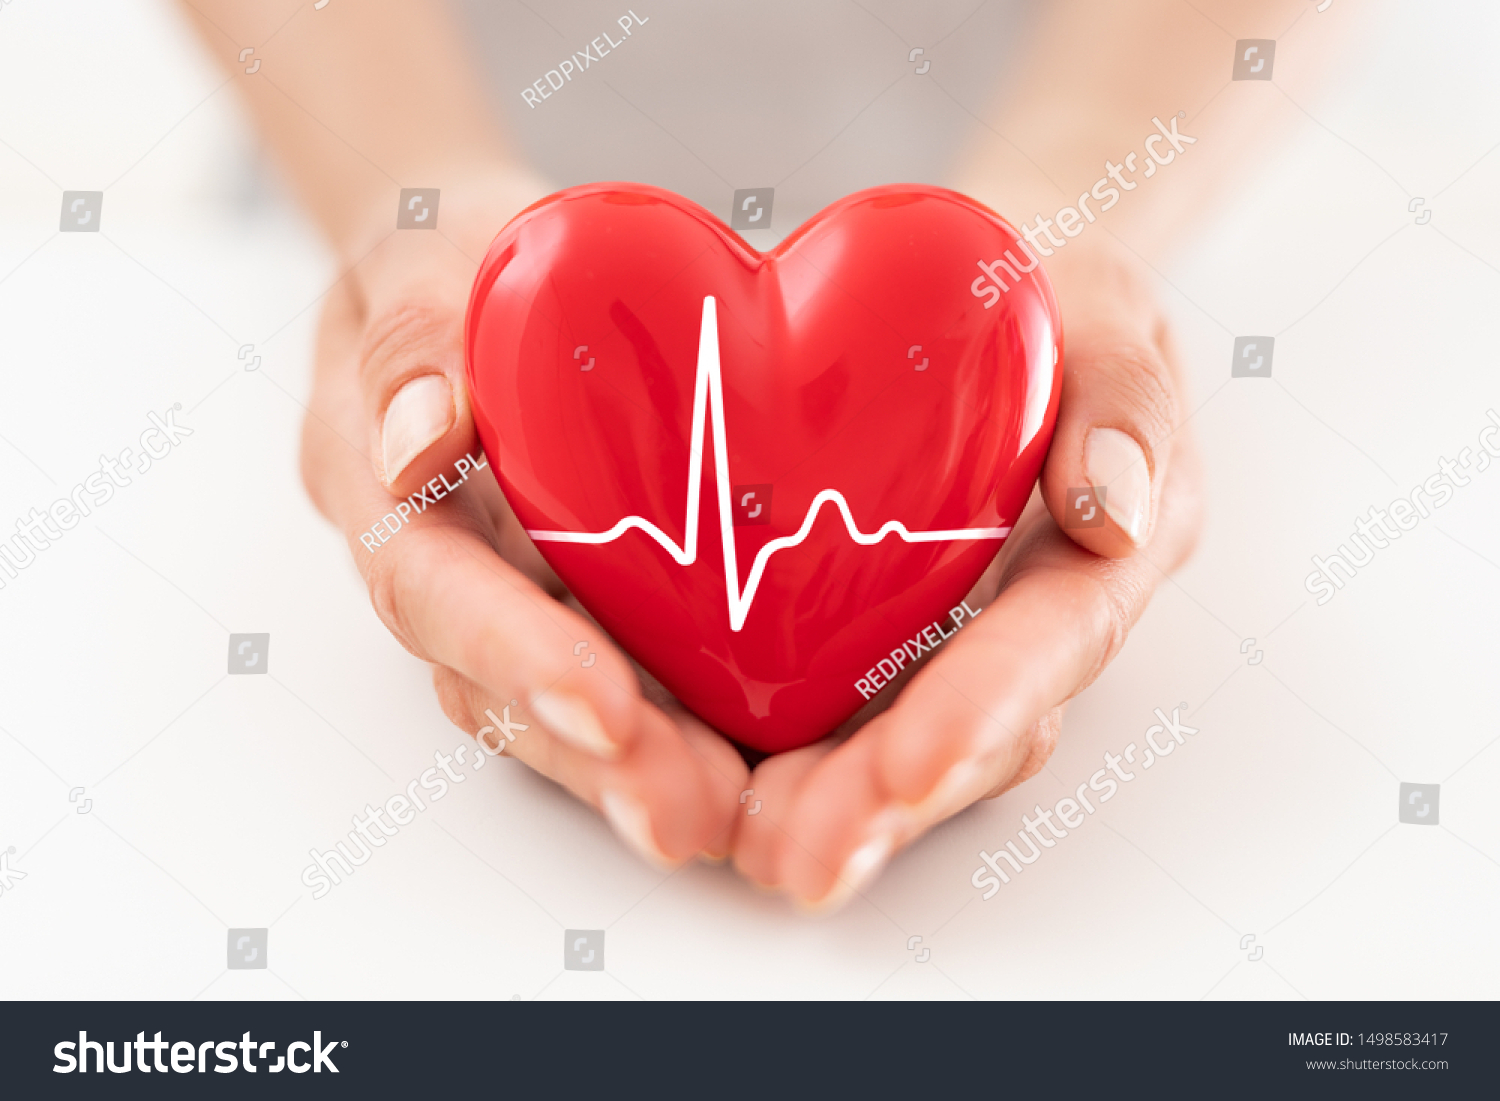 The woman is holding a red heart. Concept for charity, health insurance, love, international cardiology day. #1498583417